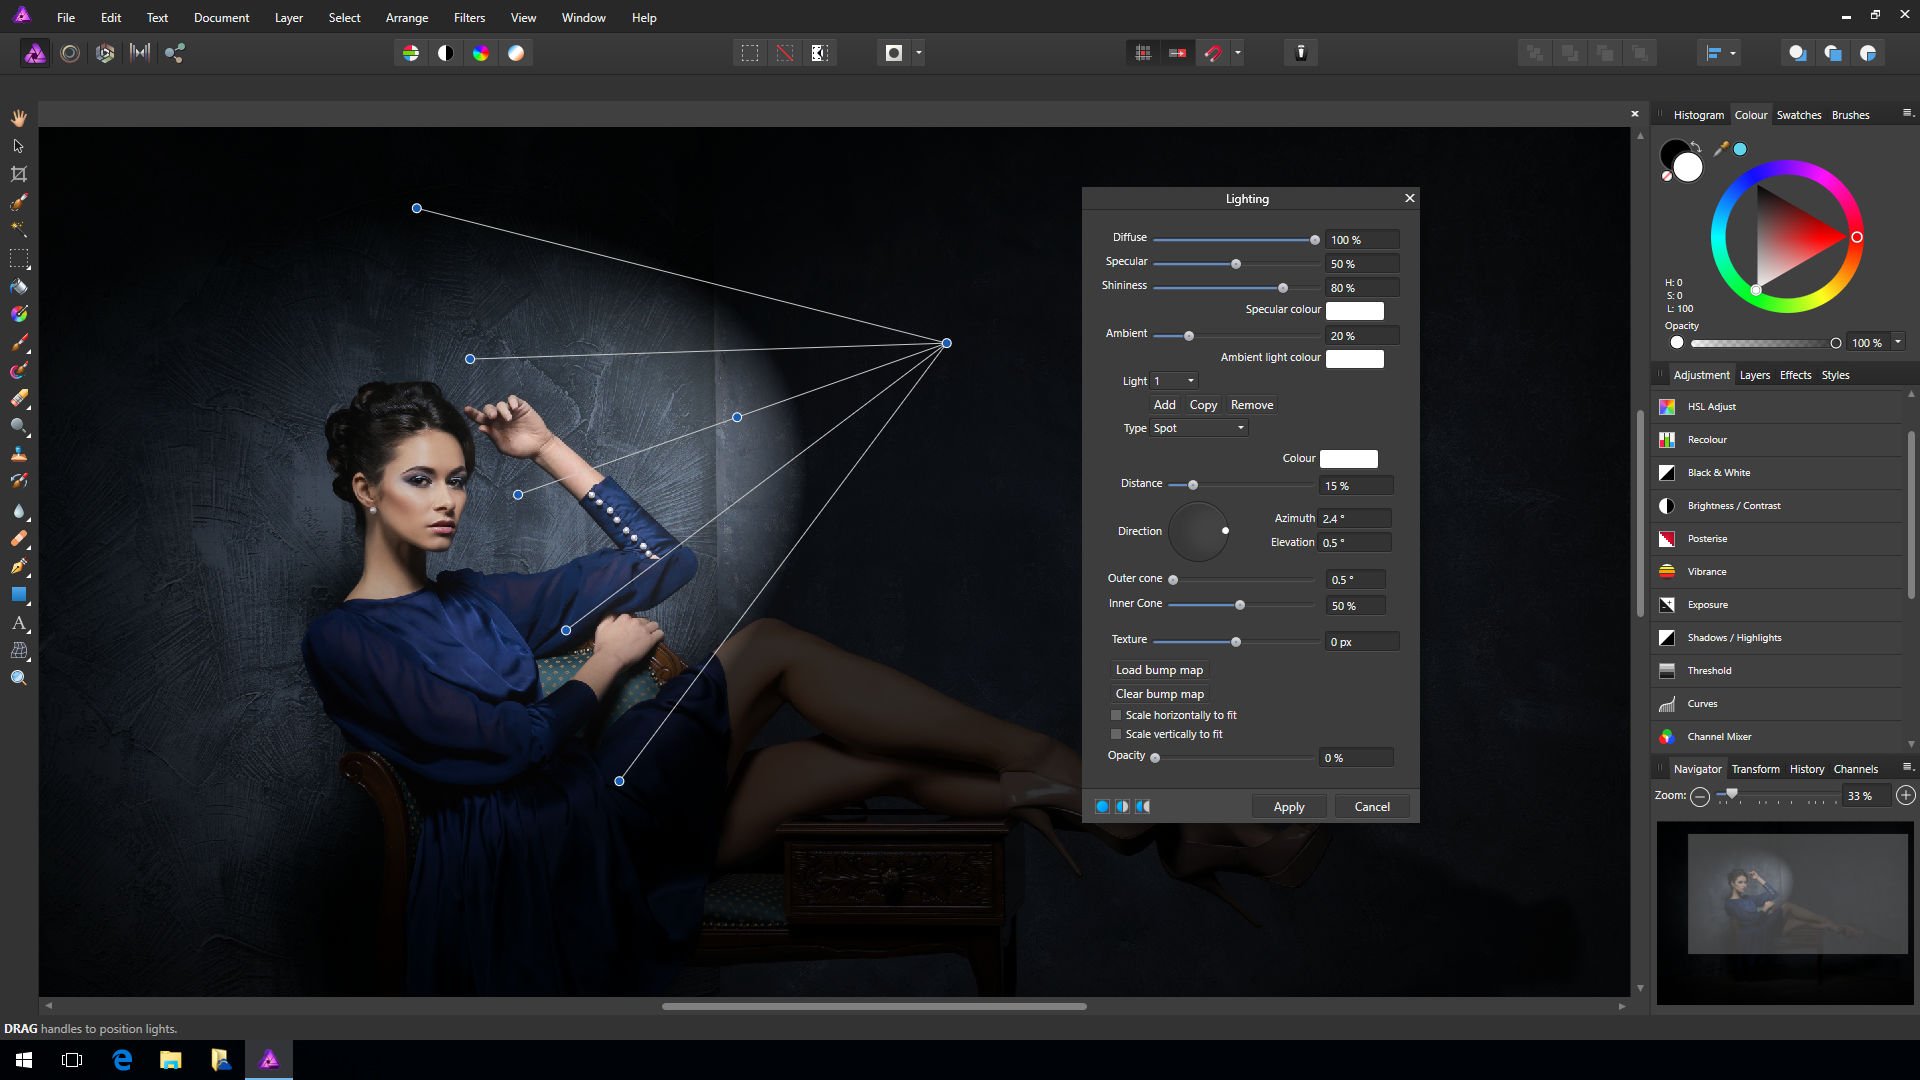 Affinity photo for mac free download